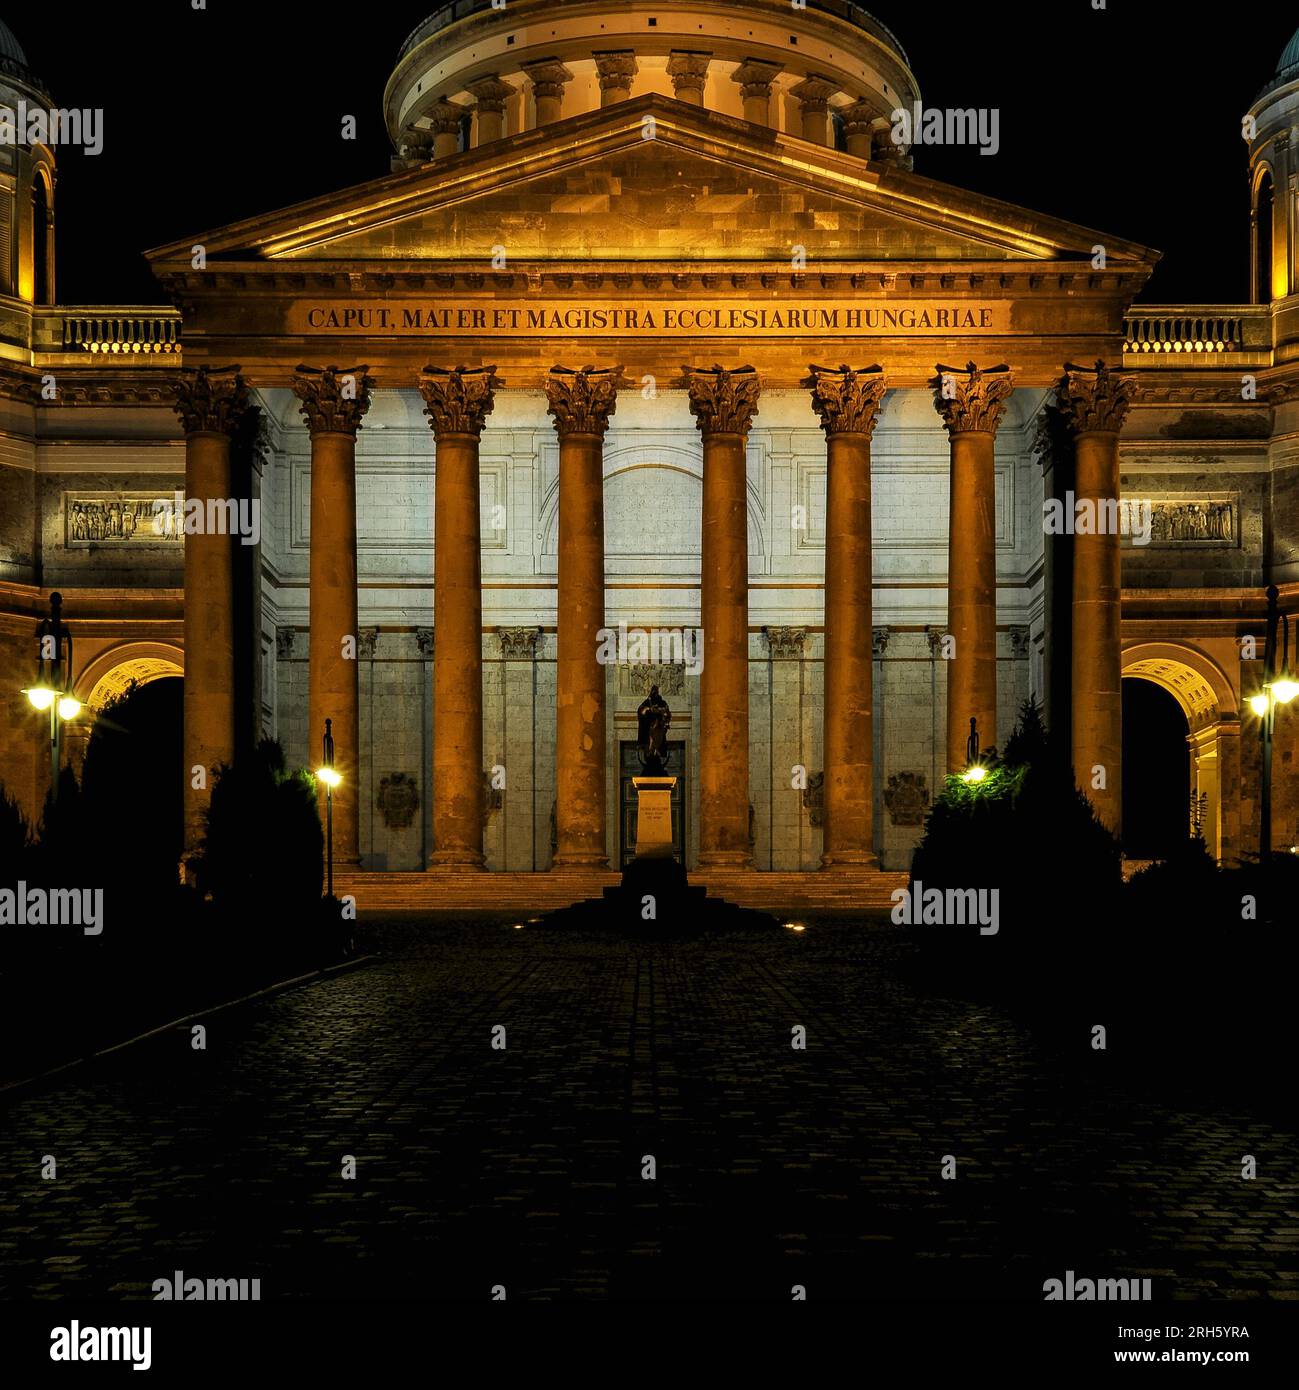 East front of Esztergom Basilica in Hungary.  The basilica, completed in 1869, was built in neoclassical style and is unusual because its main facade faces east.  The Latin inscription on the portico (“Caput Mater et Magistra Ecclesiarum Hungariae”) translates as “Head, Mother and Teacher of the Hungarian Churches”. Stock Photo